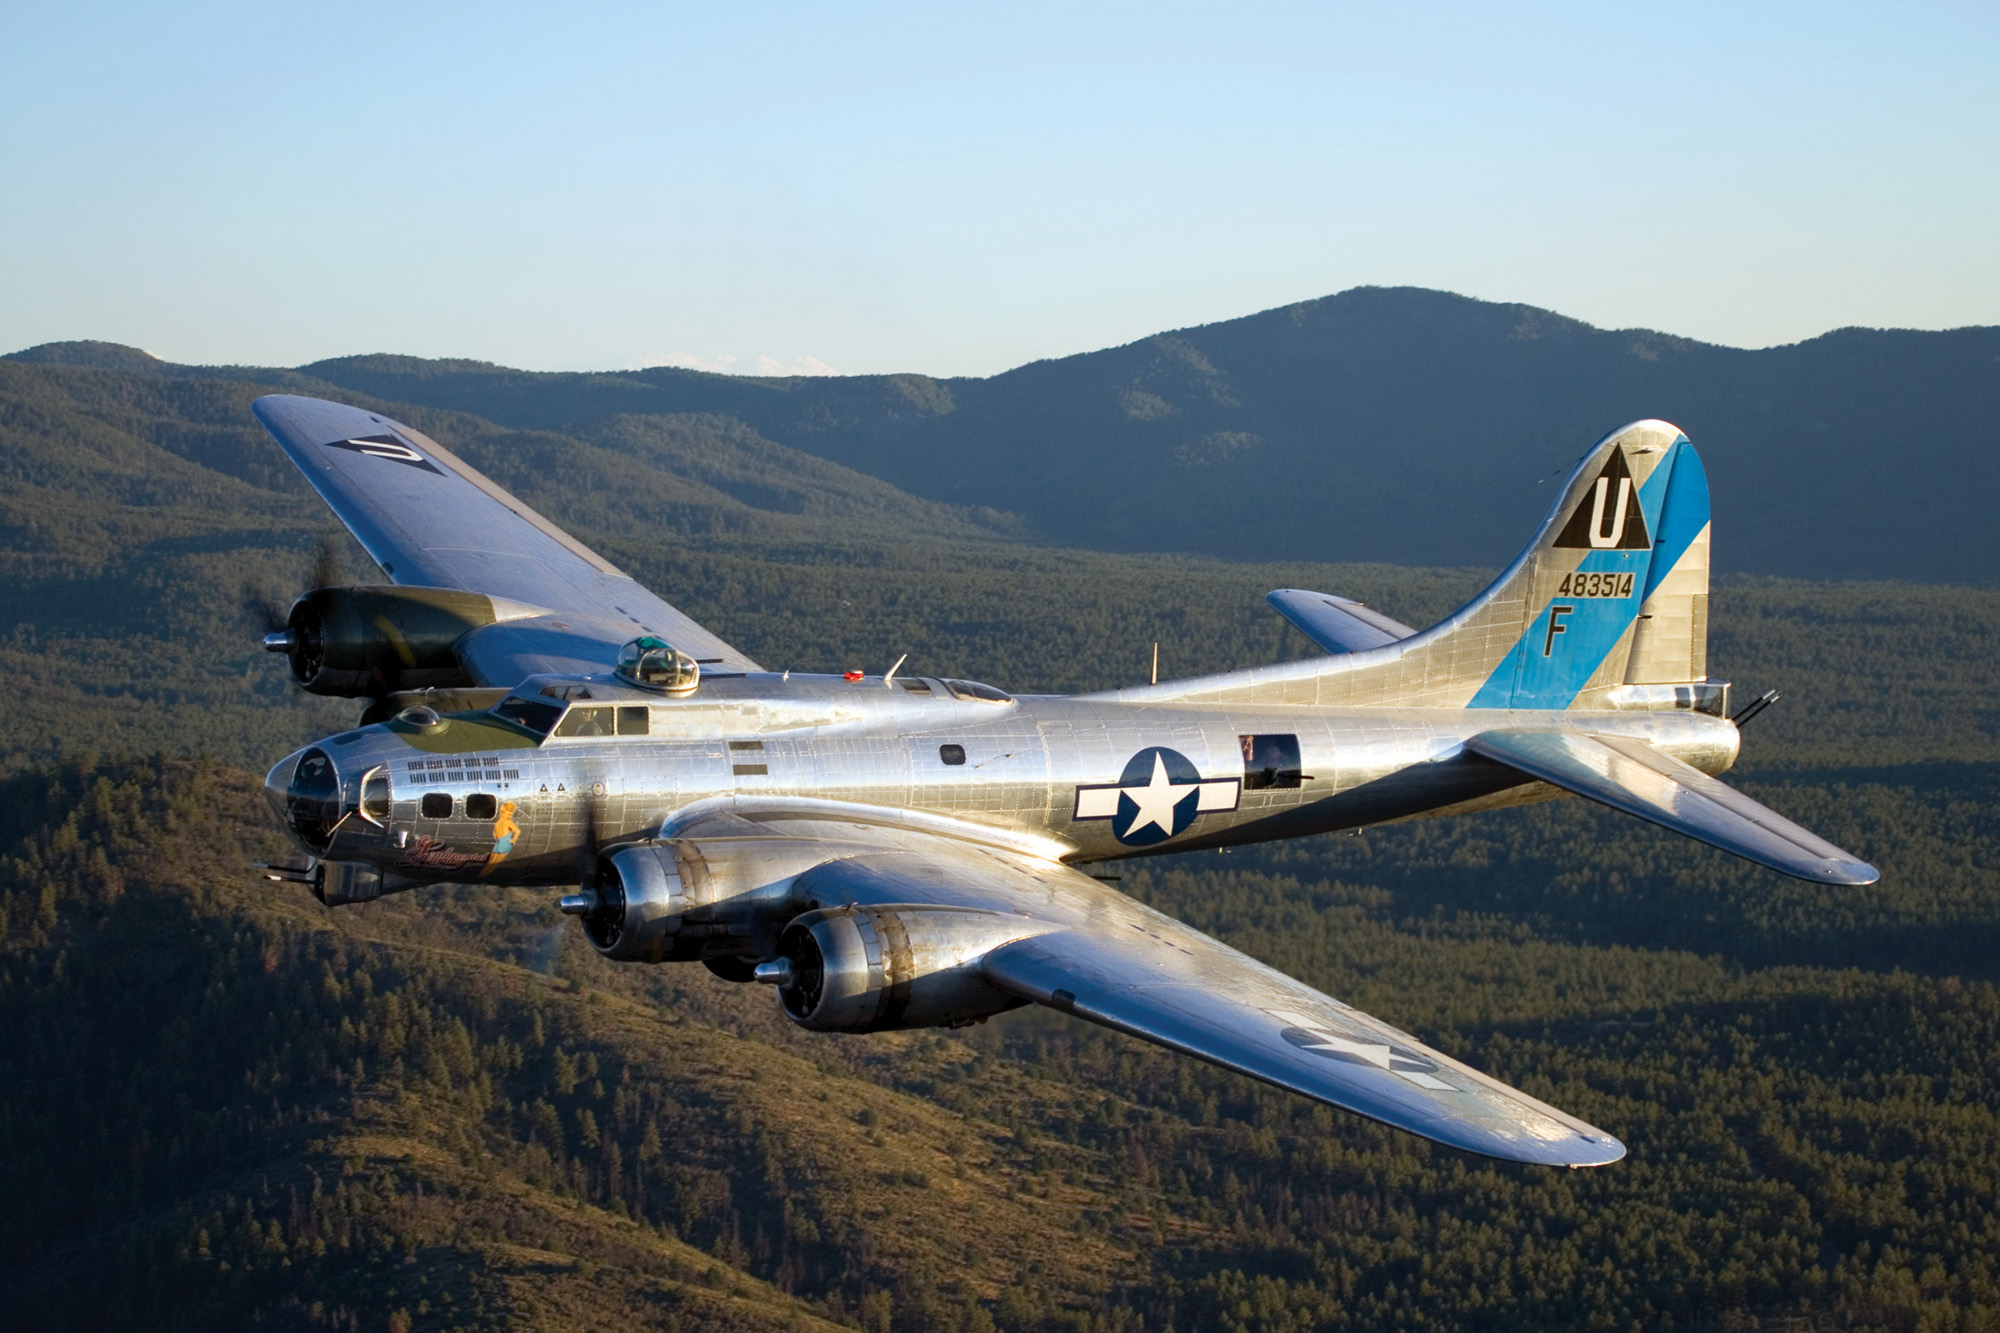 A Night in the ‘40s”—Take a Sentimental Journey at the CAF Aircraft Museum